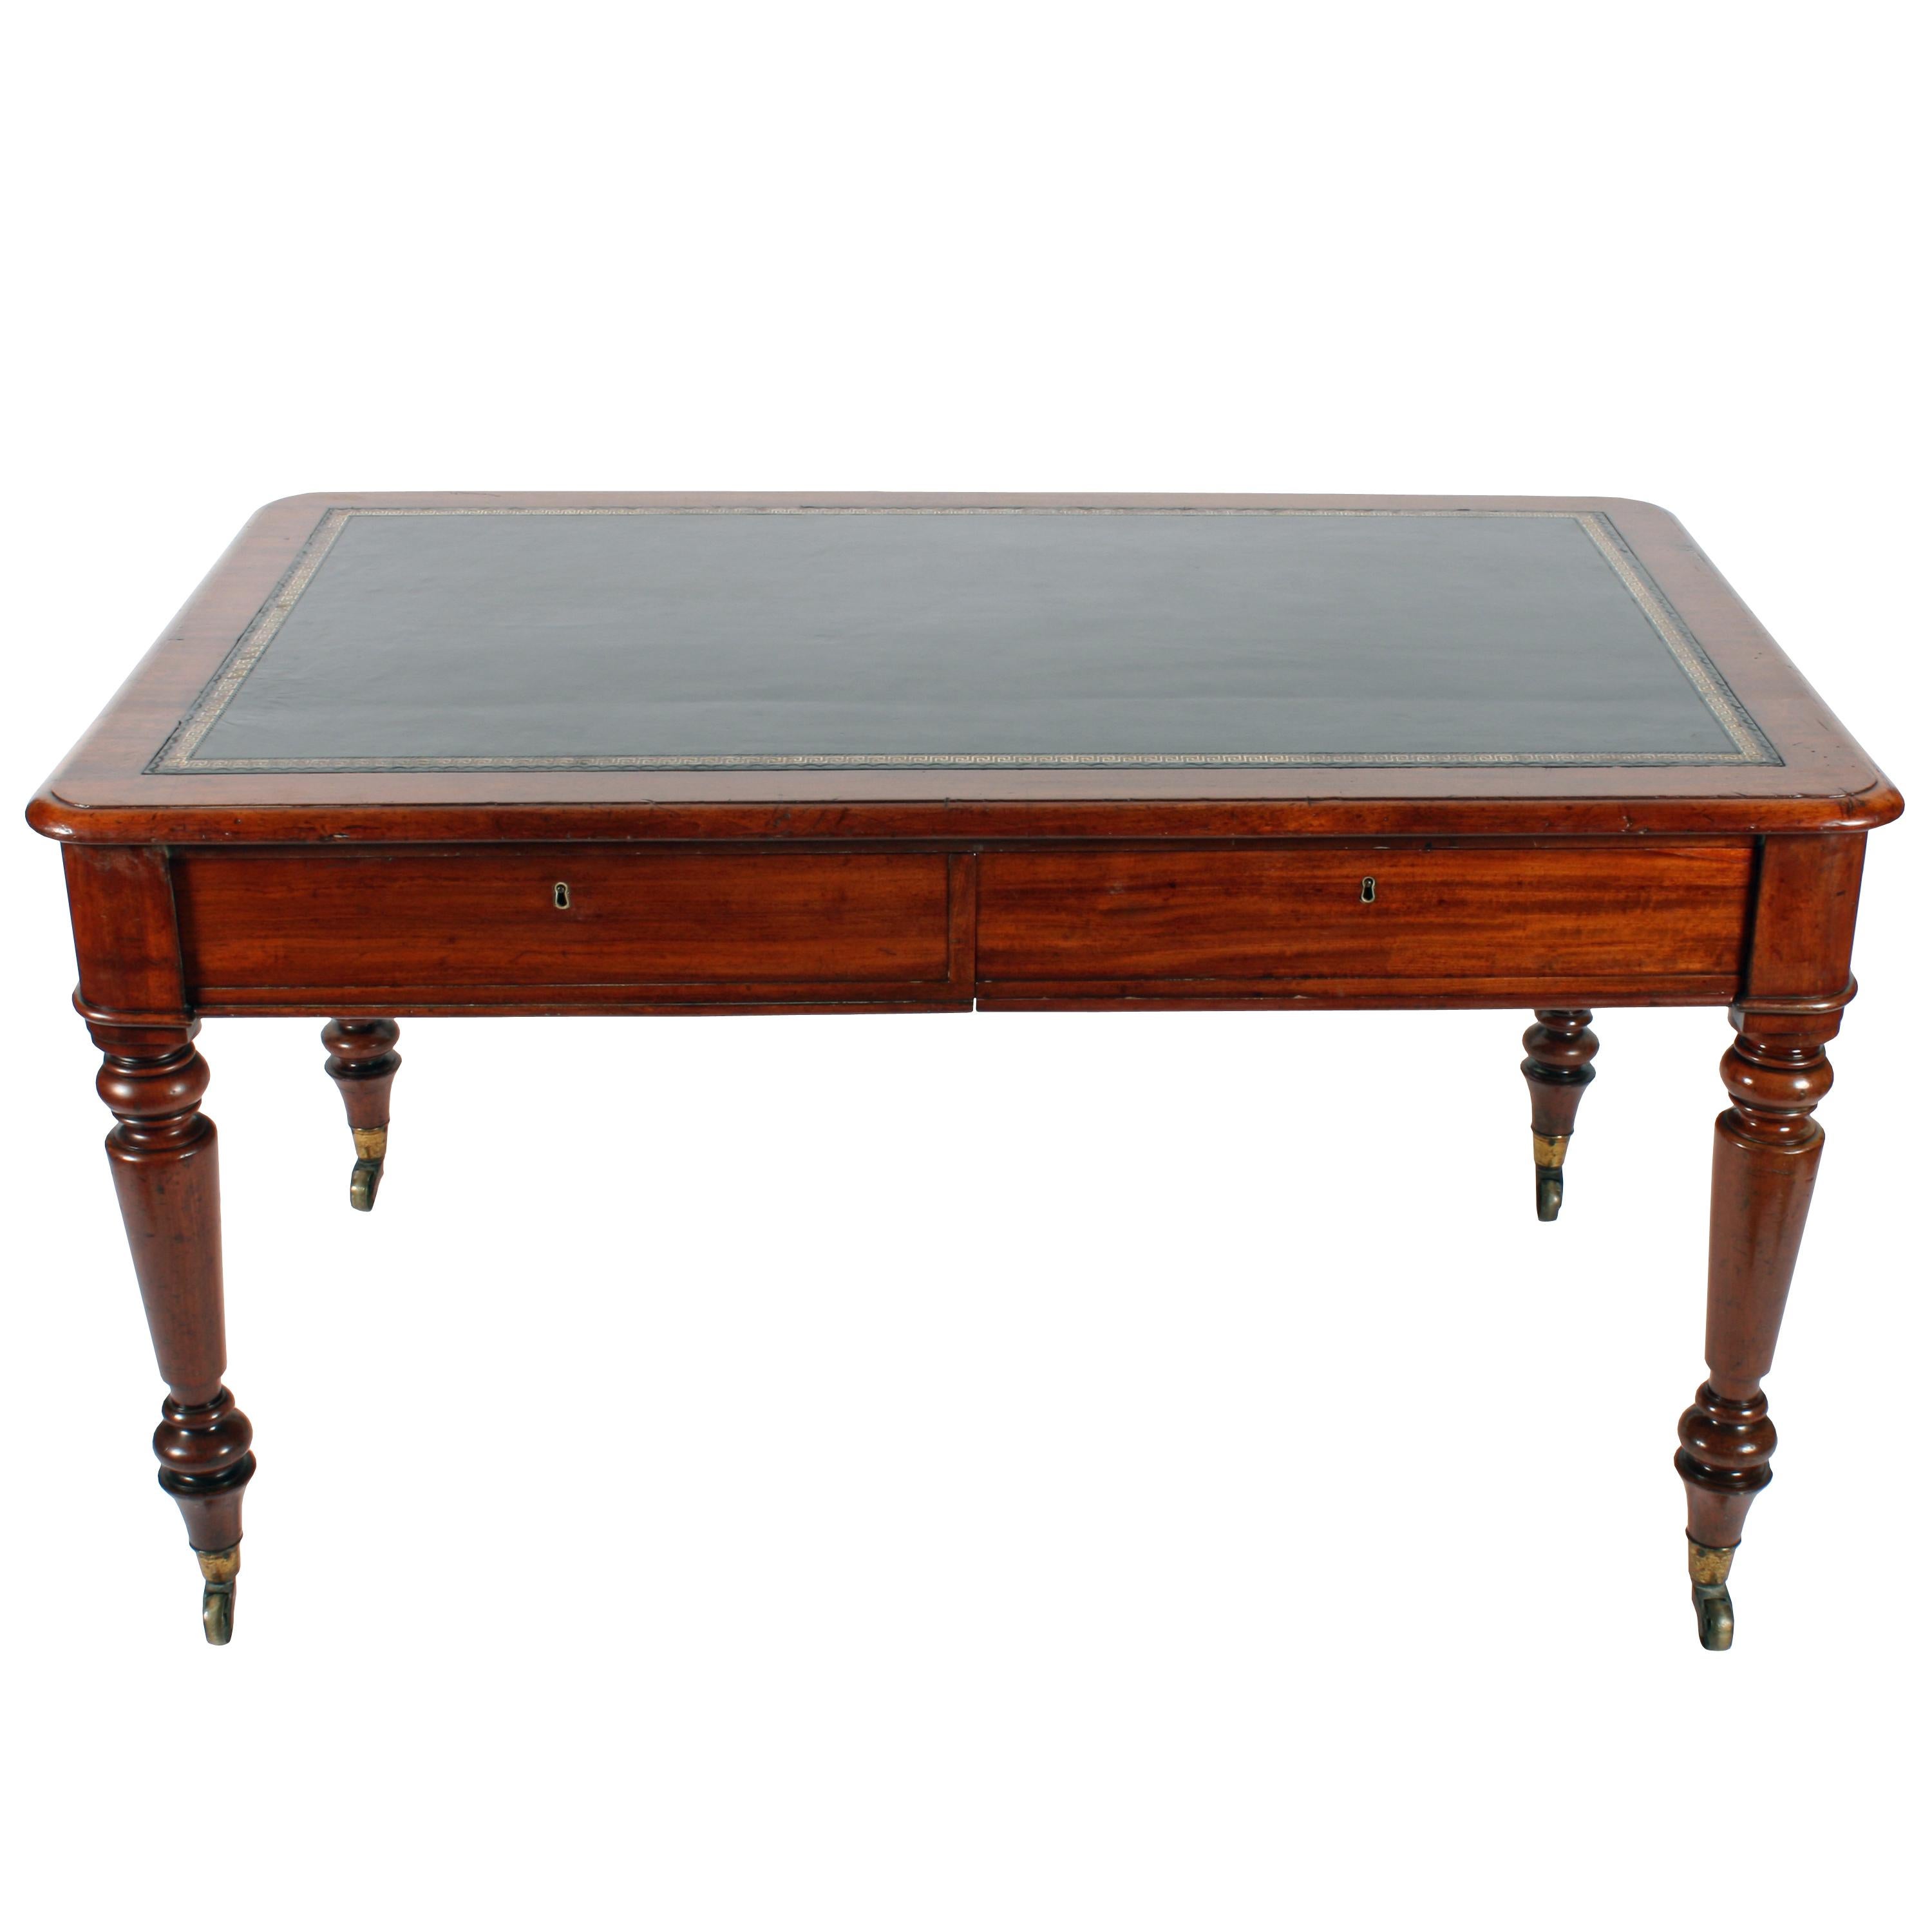 English 19th Century William IV Mahogany 4 DrawerWriting Table-Library Table For Sale